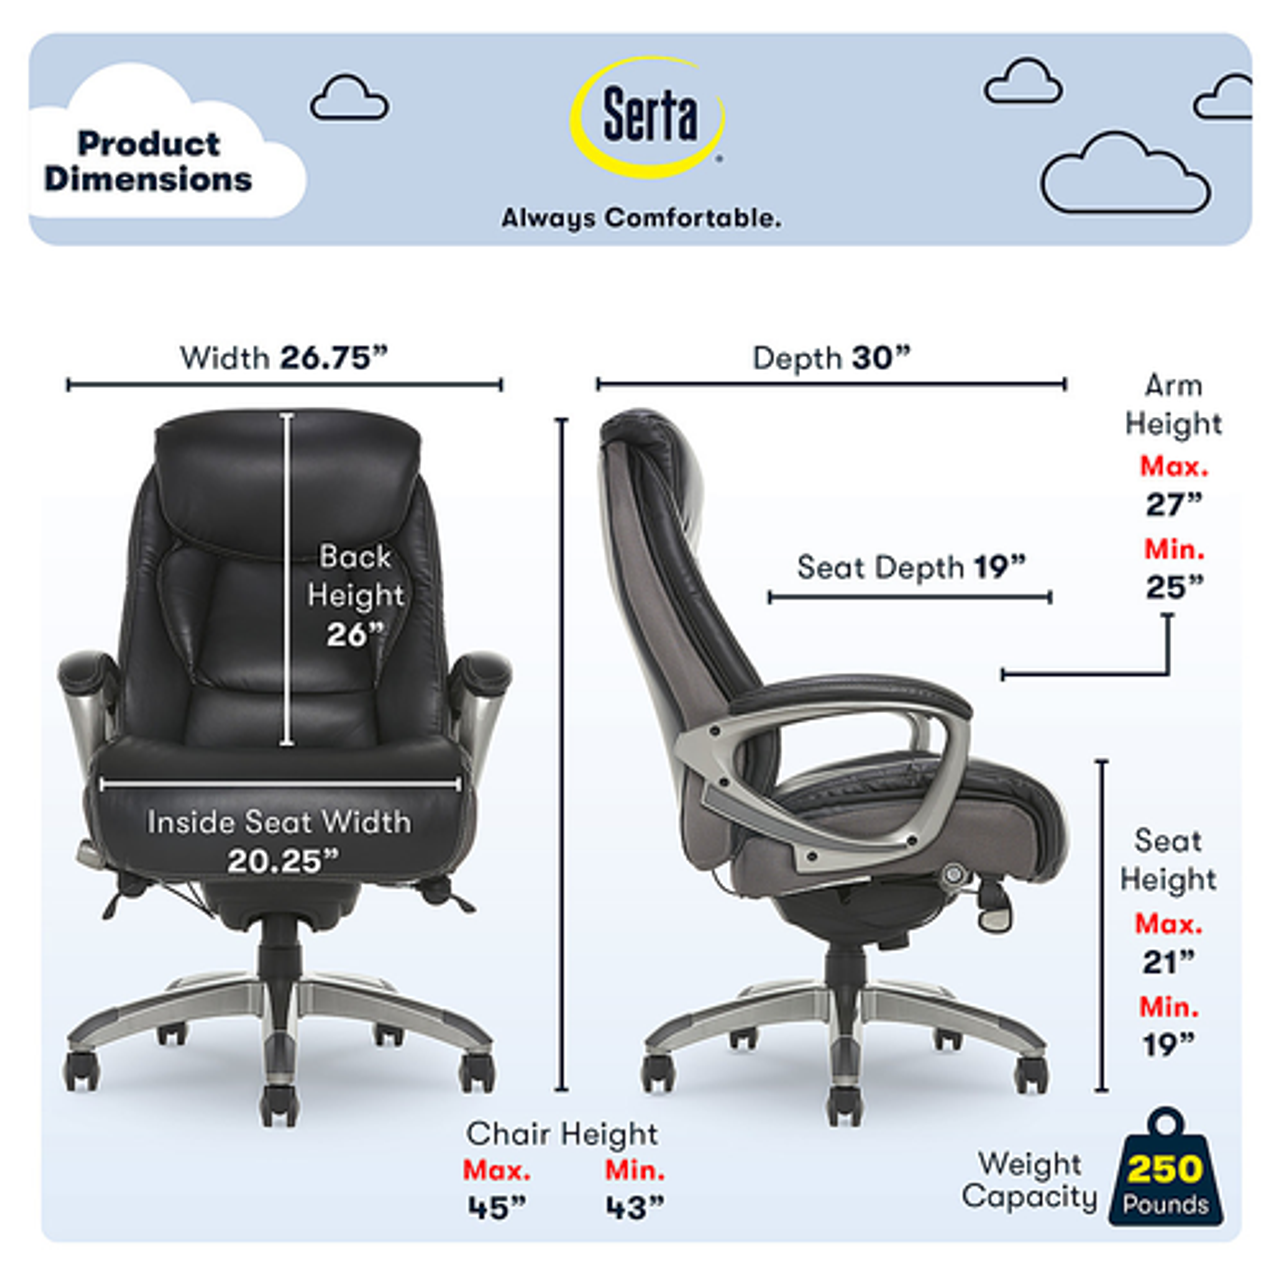 Serta - Lautner Executive Office Chair - Black with Gray Mesh